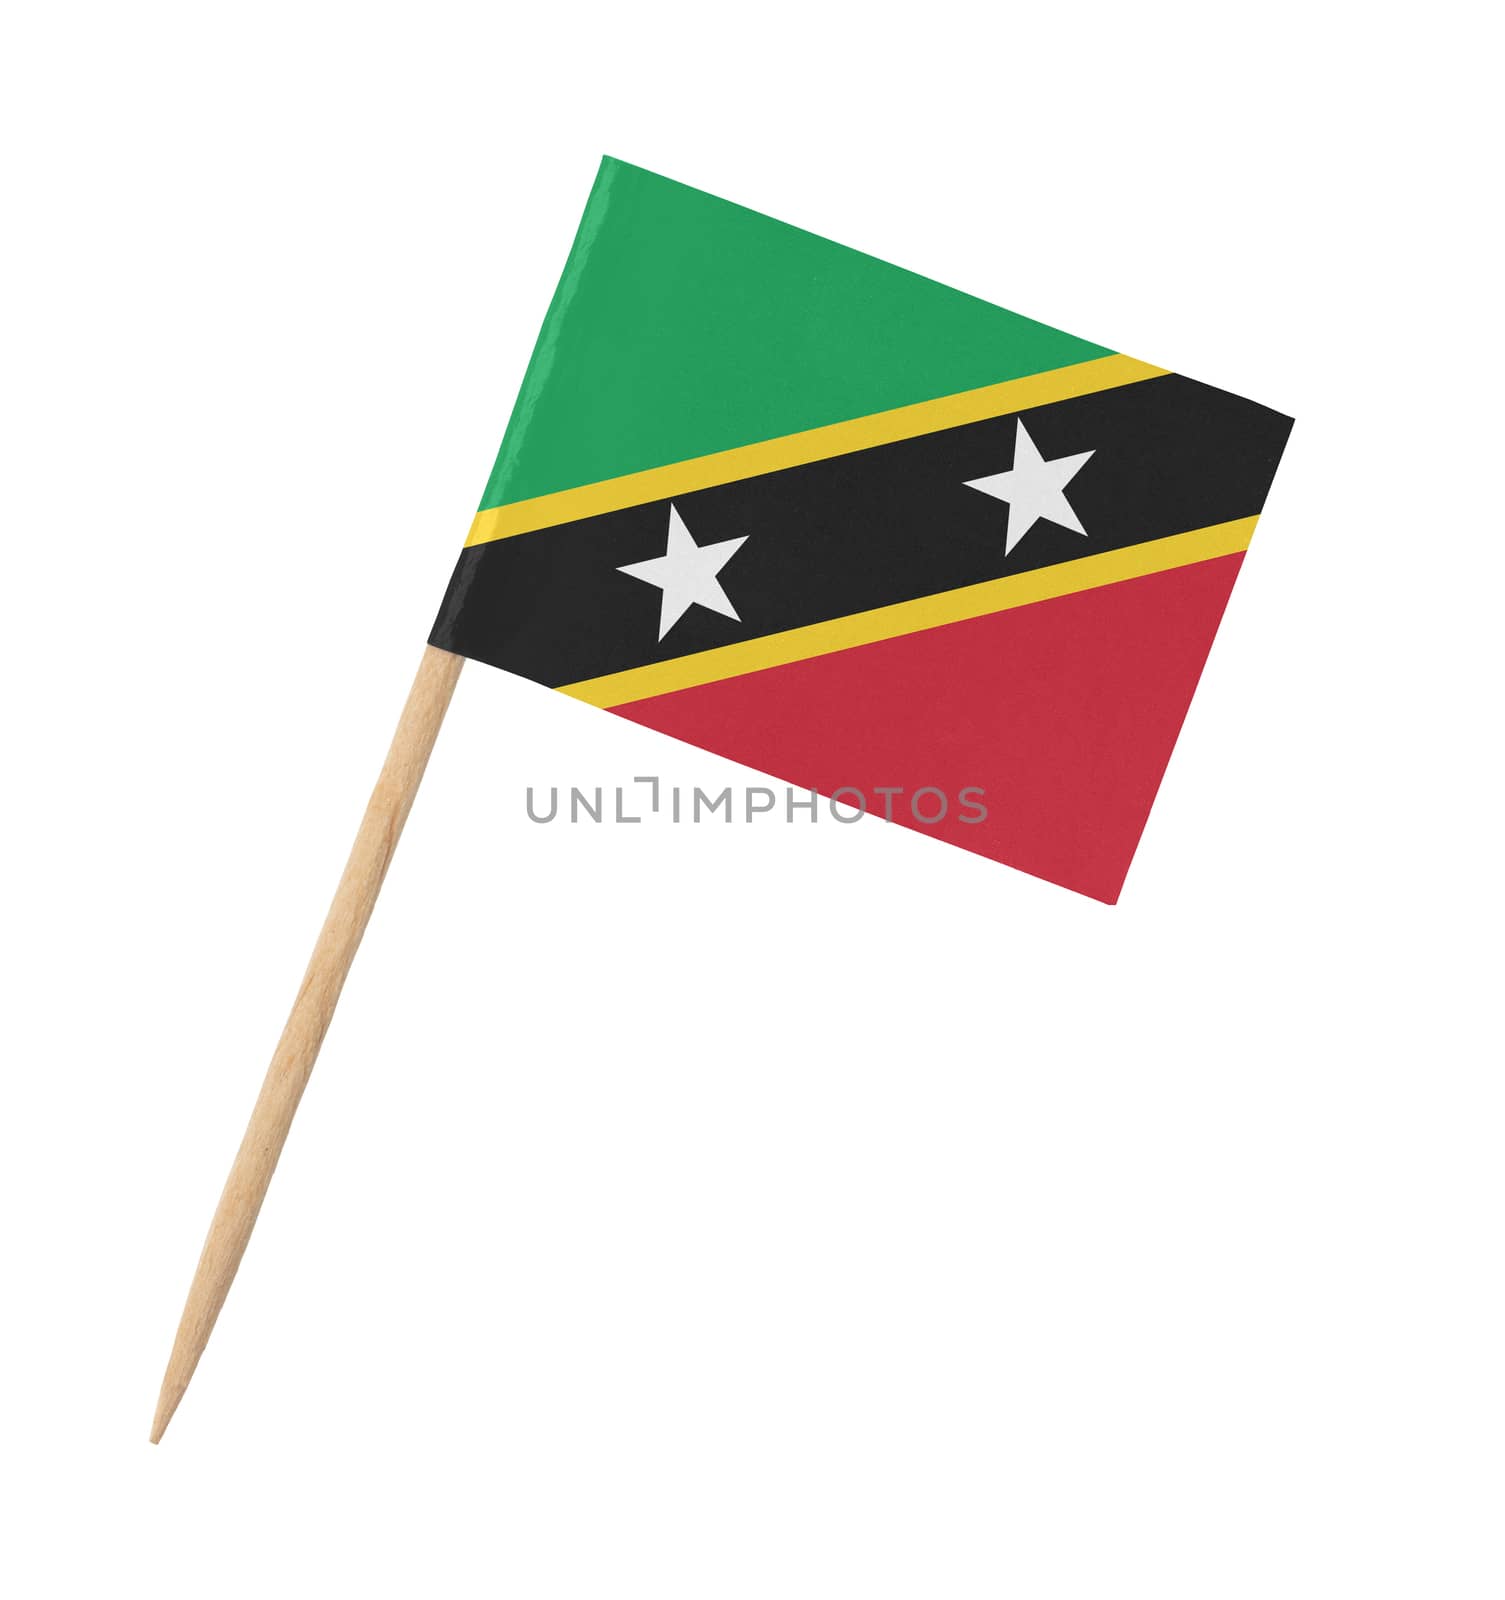 Small paper flag of Saint Kitts and Nevis on wooden stick by michaklootwijk